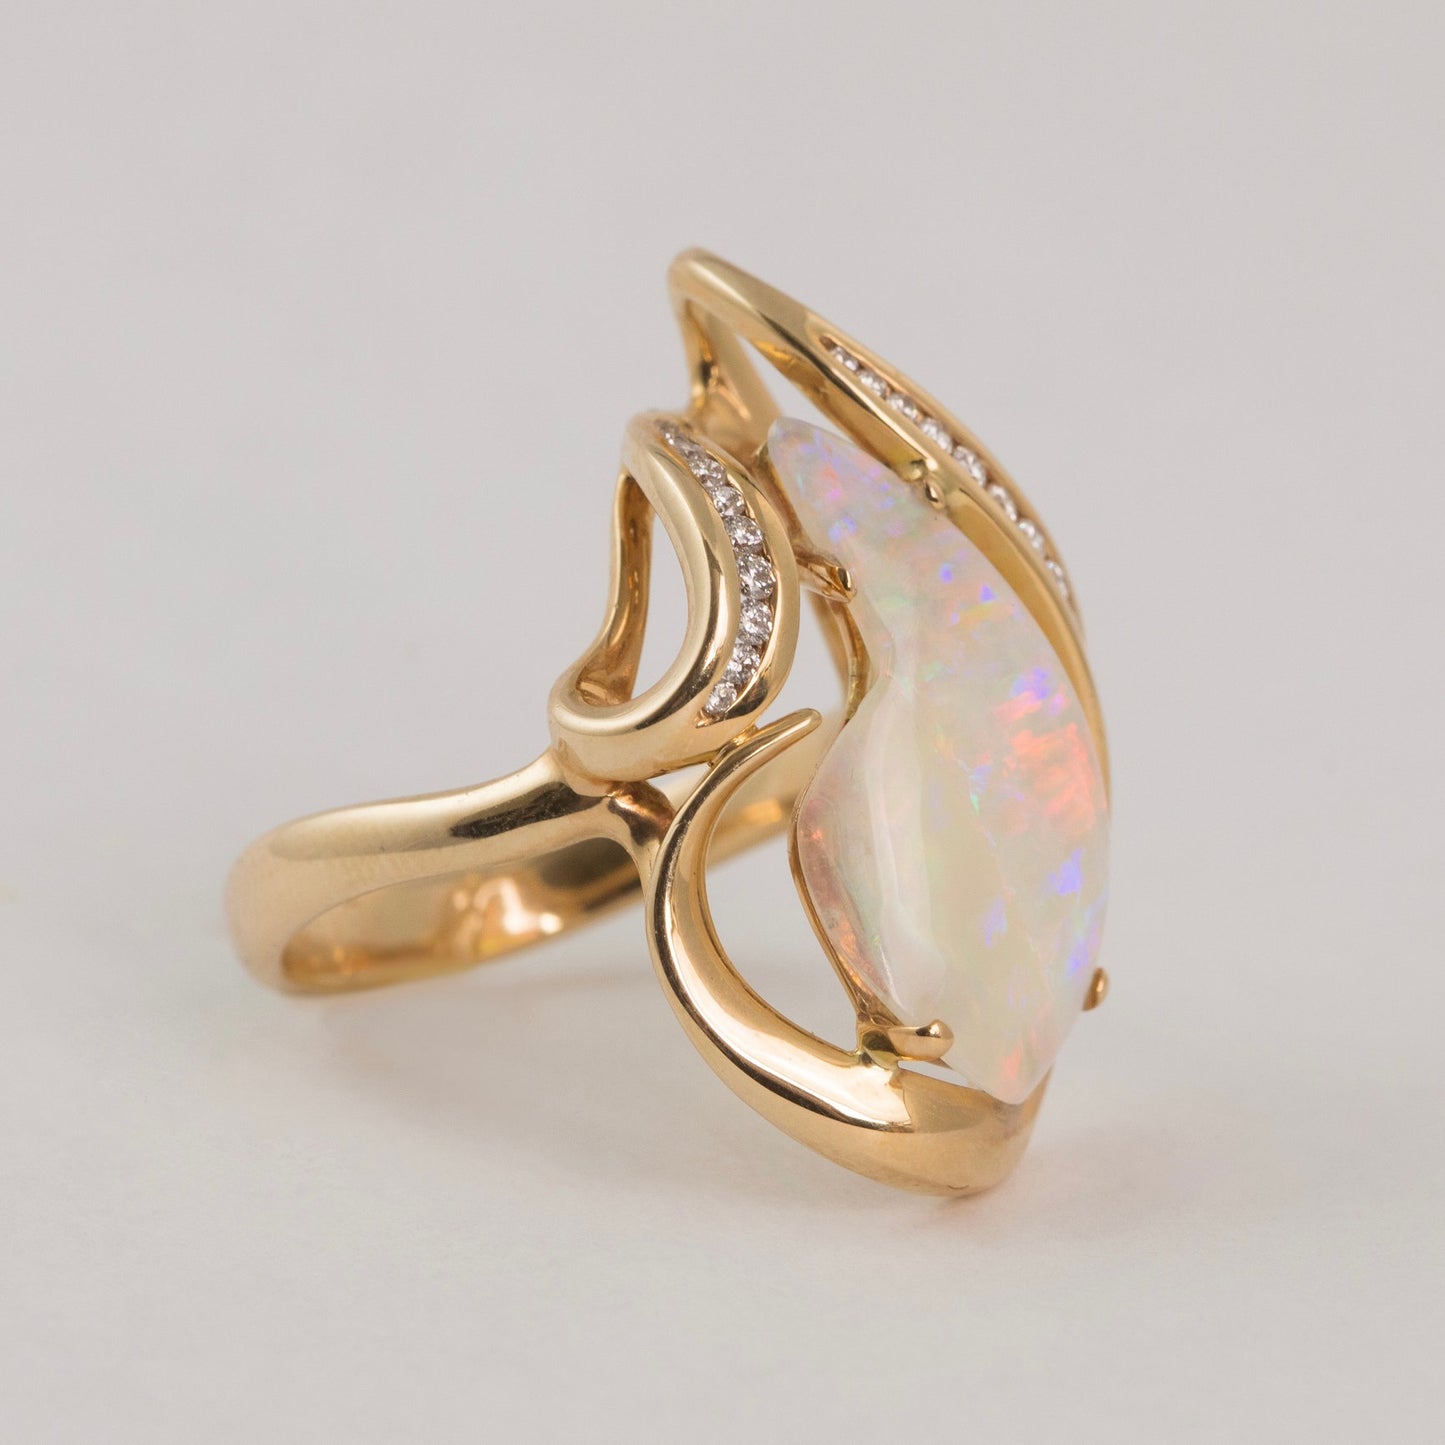 Abstract Opal Ring